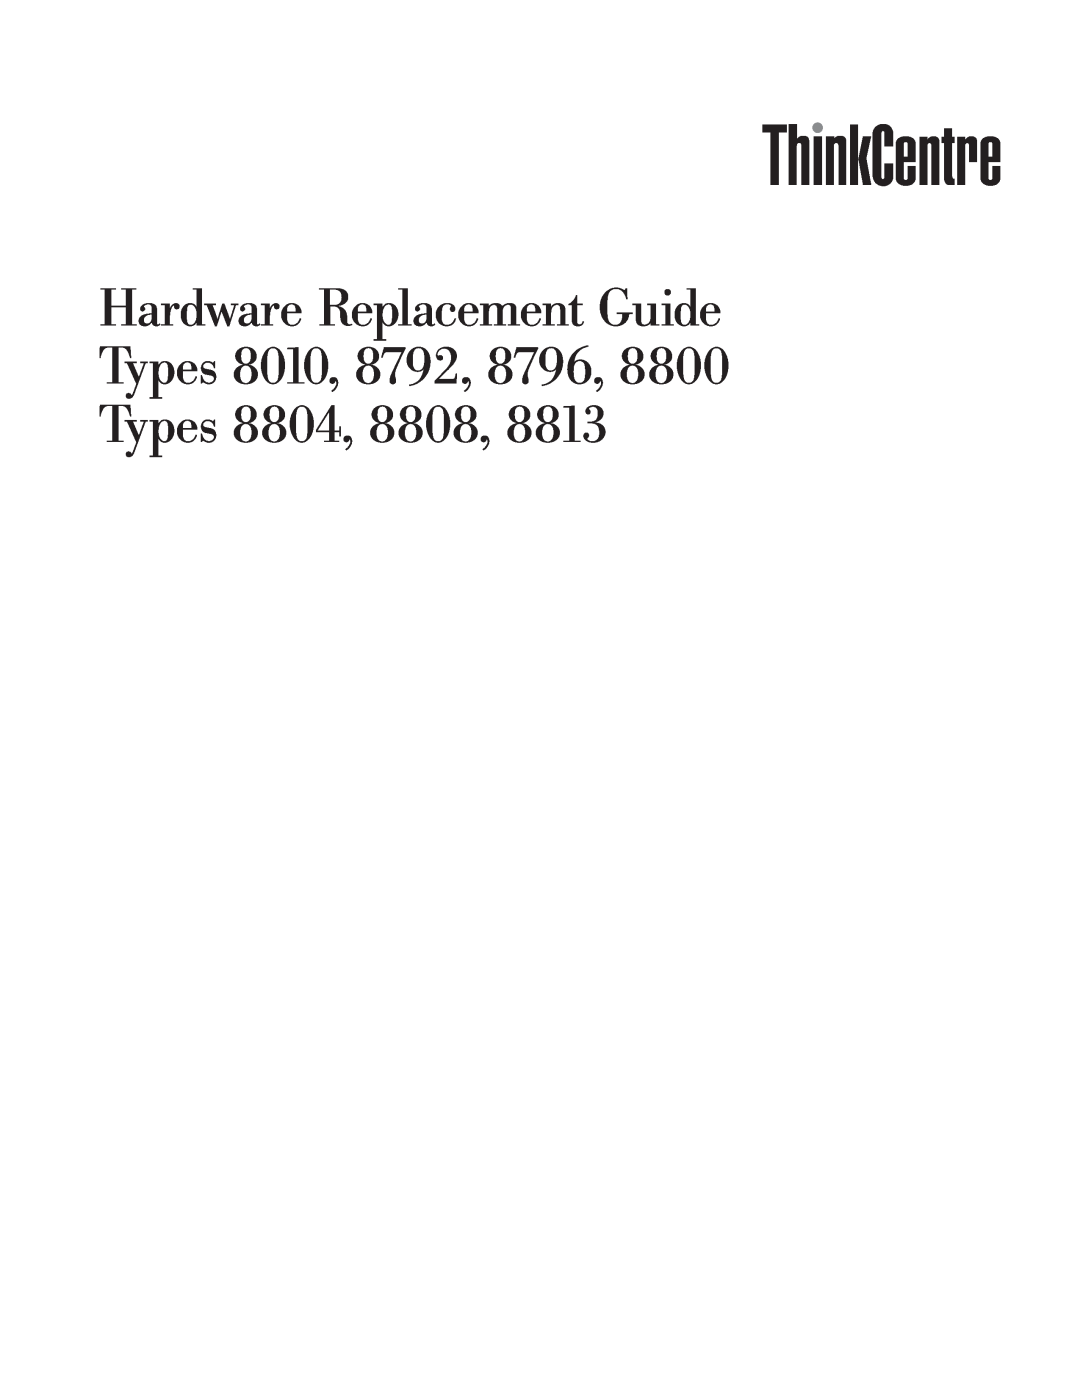 Lenovo 8800, 8813 manual Hardware Replacement Guide, Types 8010, 8792, 8796, Types 8804, 8808 